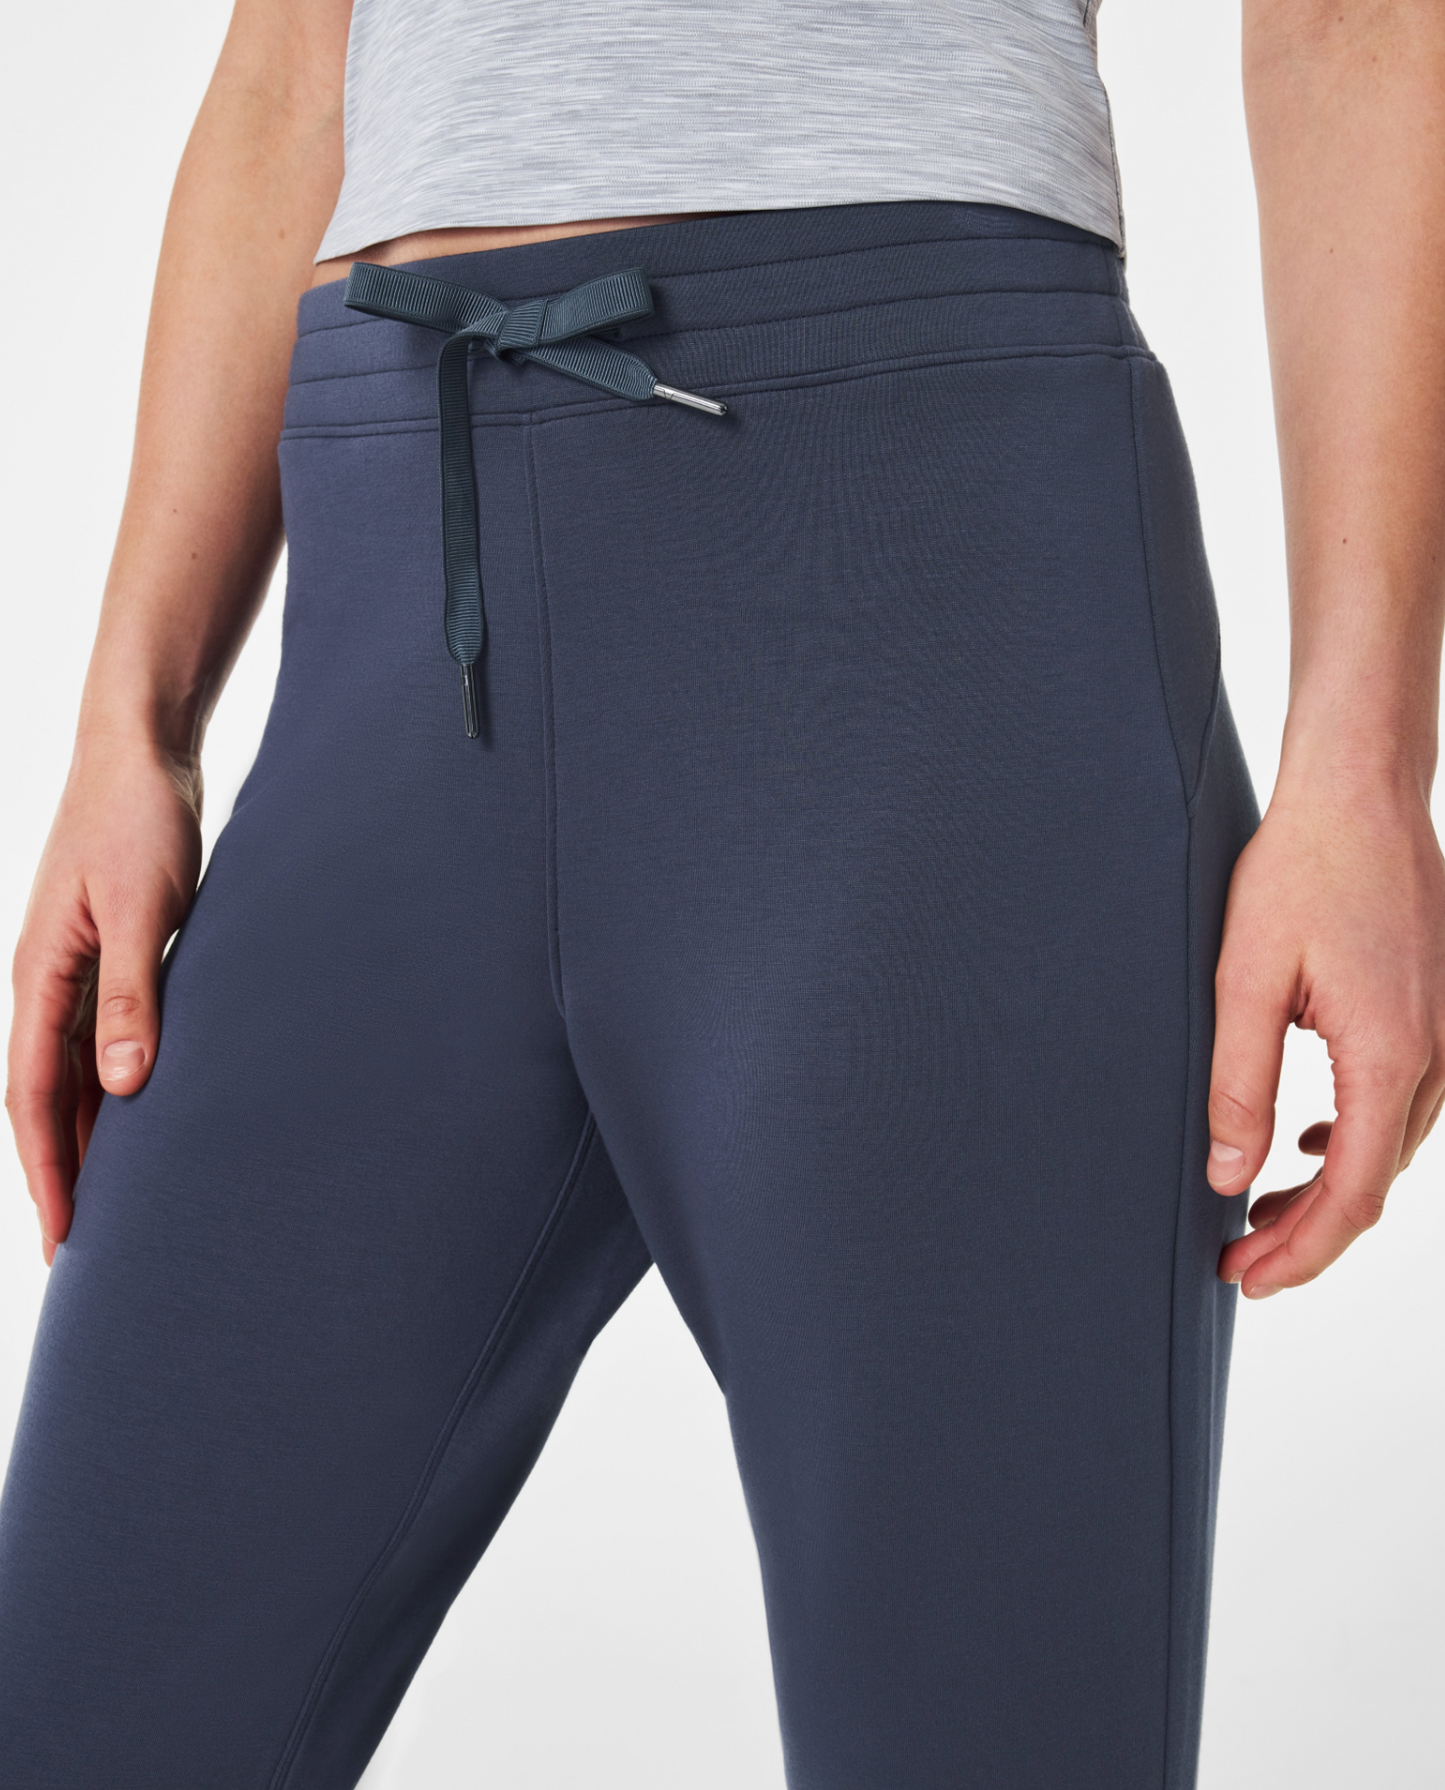 Spanx AirEssentials Tapered Pant - Dark Storm